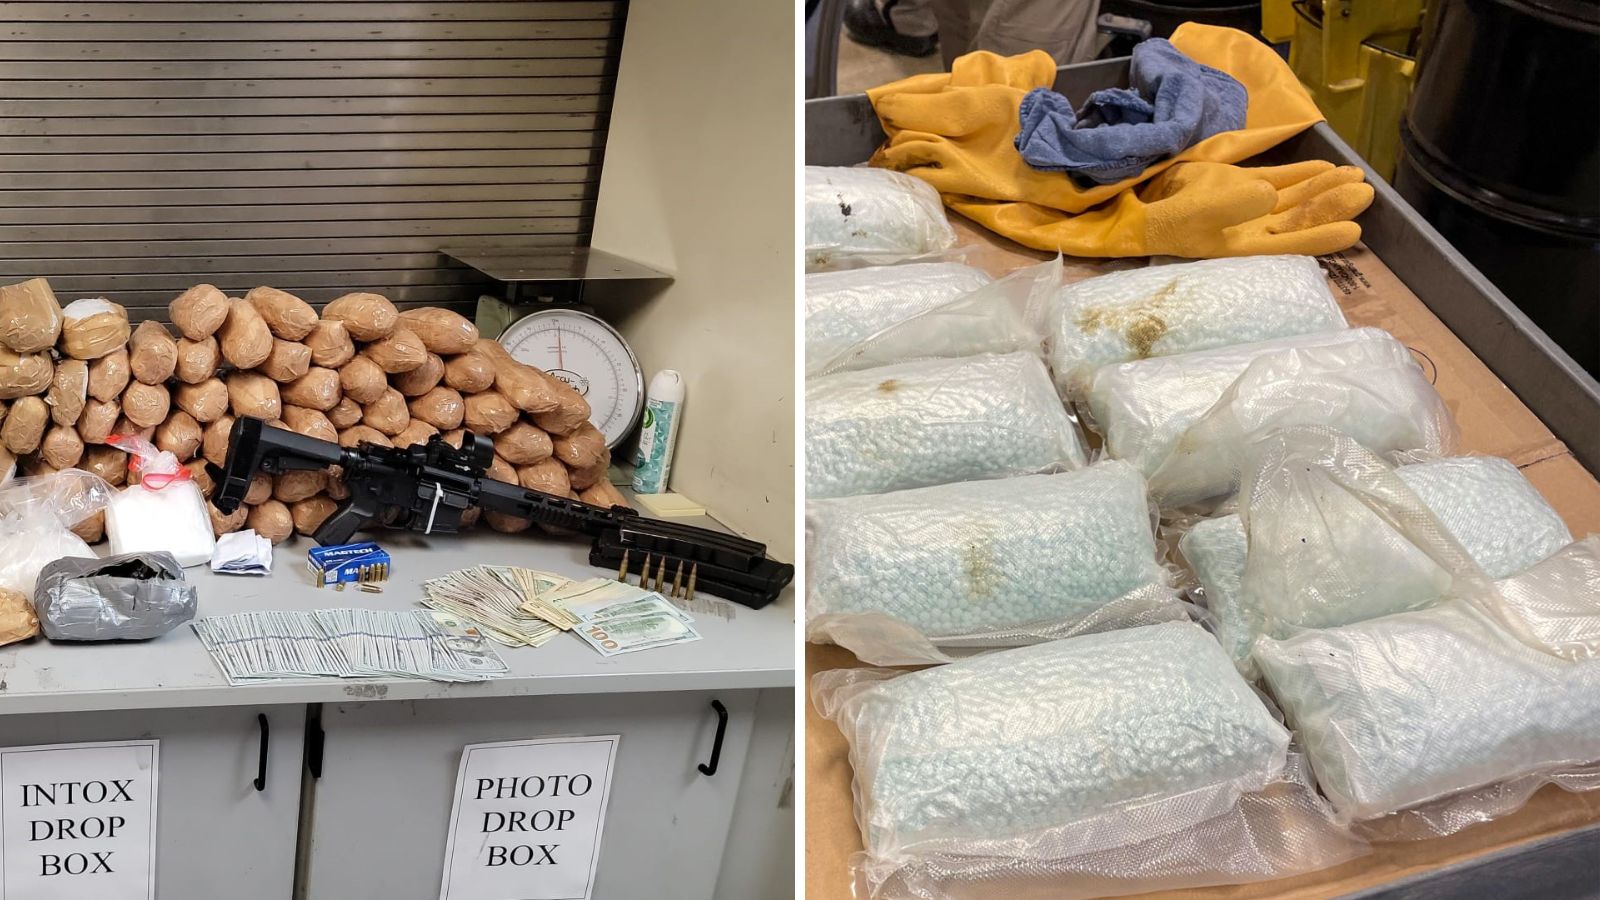 Arizona State Troopers Seize More Than 1,500 Pounds of Fentanyl in Six-Month Period...